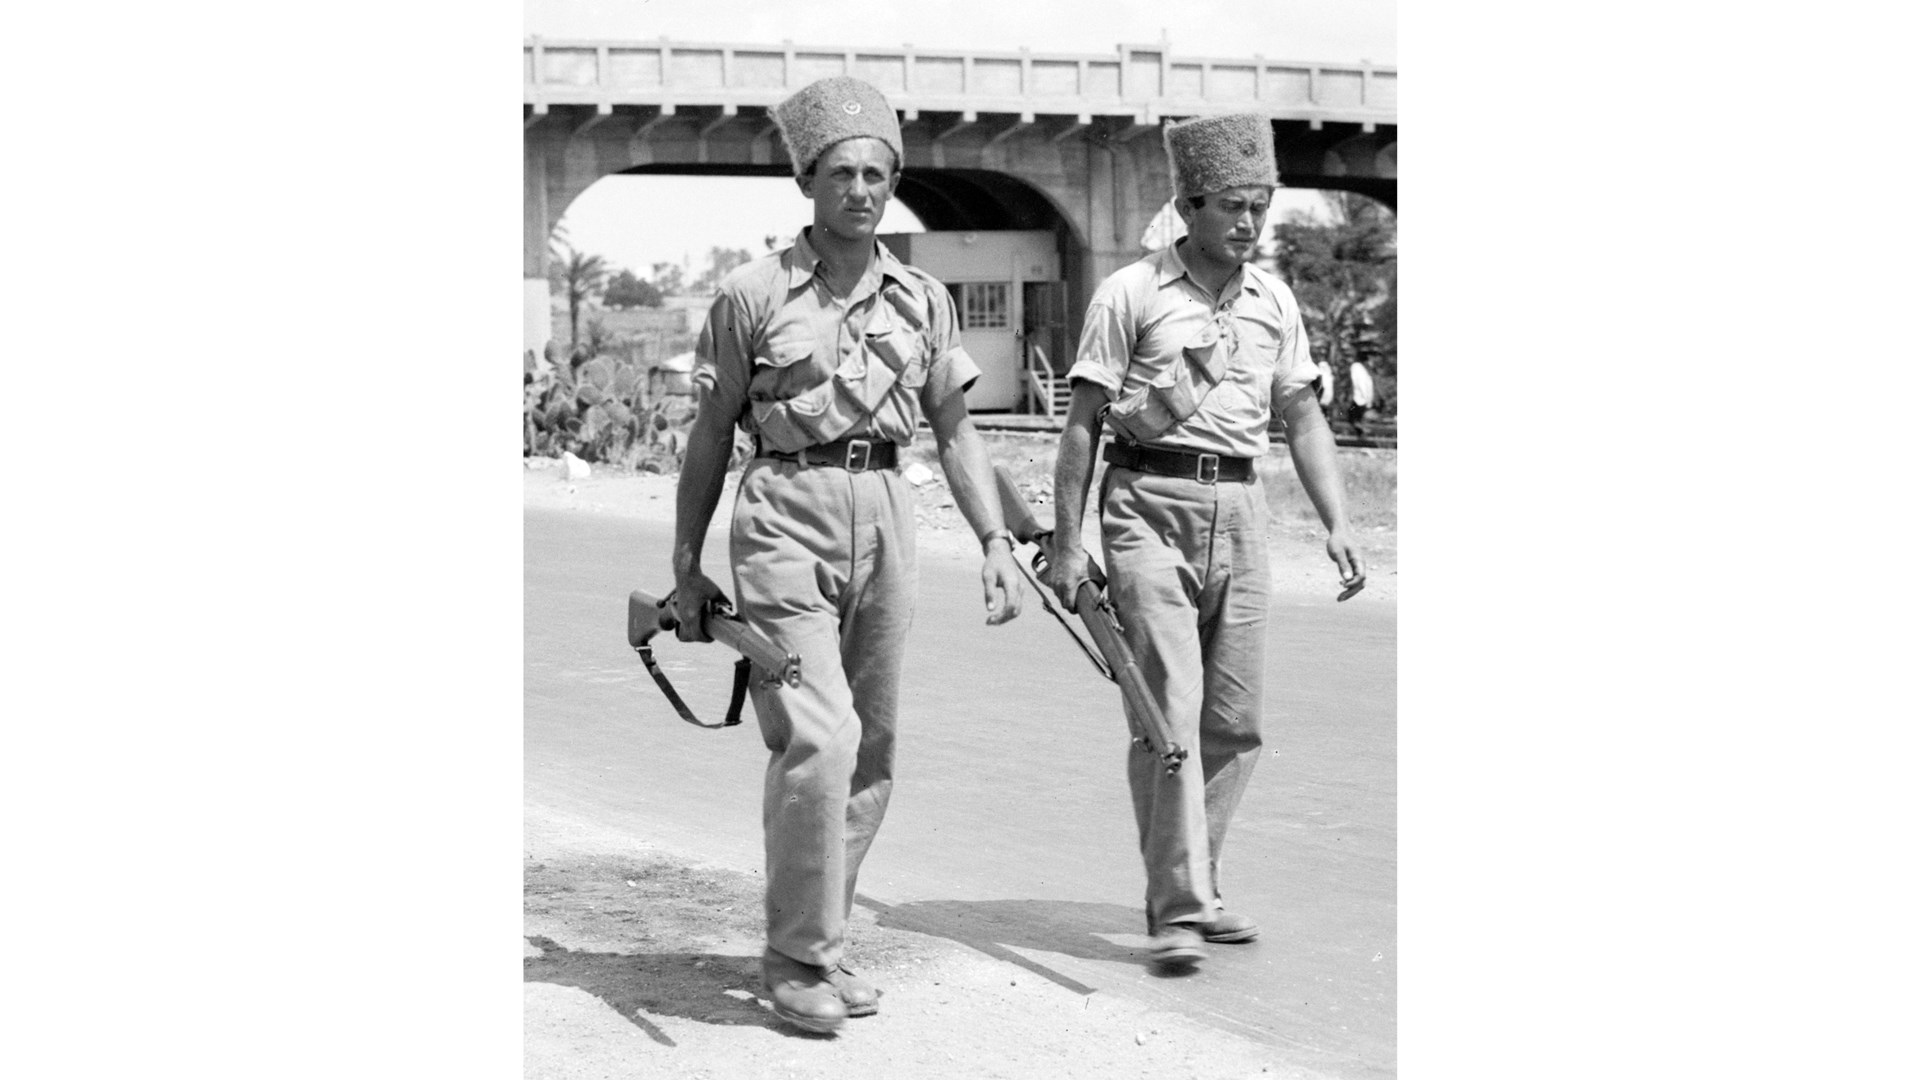 Equipped with Rifle No. 1 Mk III by the British, Jewish Supernumerary policemen patrol the streets of Haifa.  Library of Congress